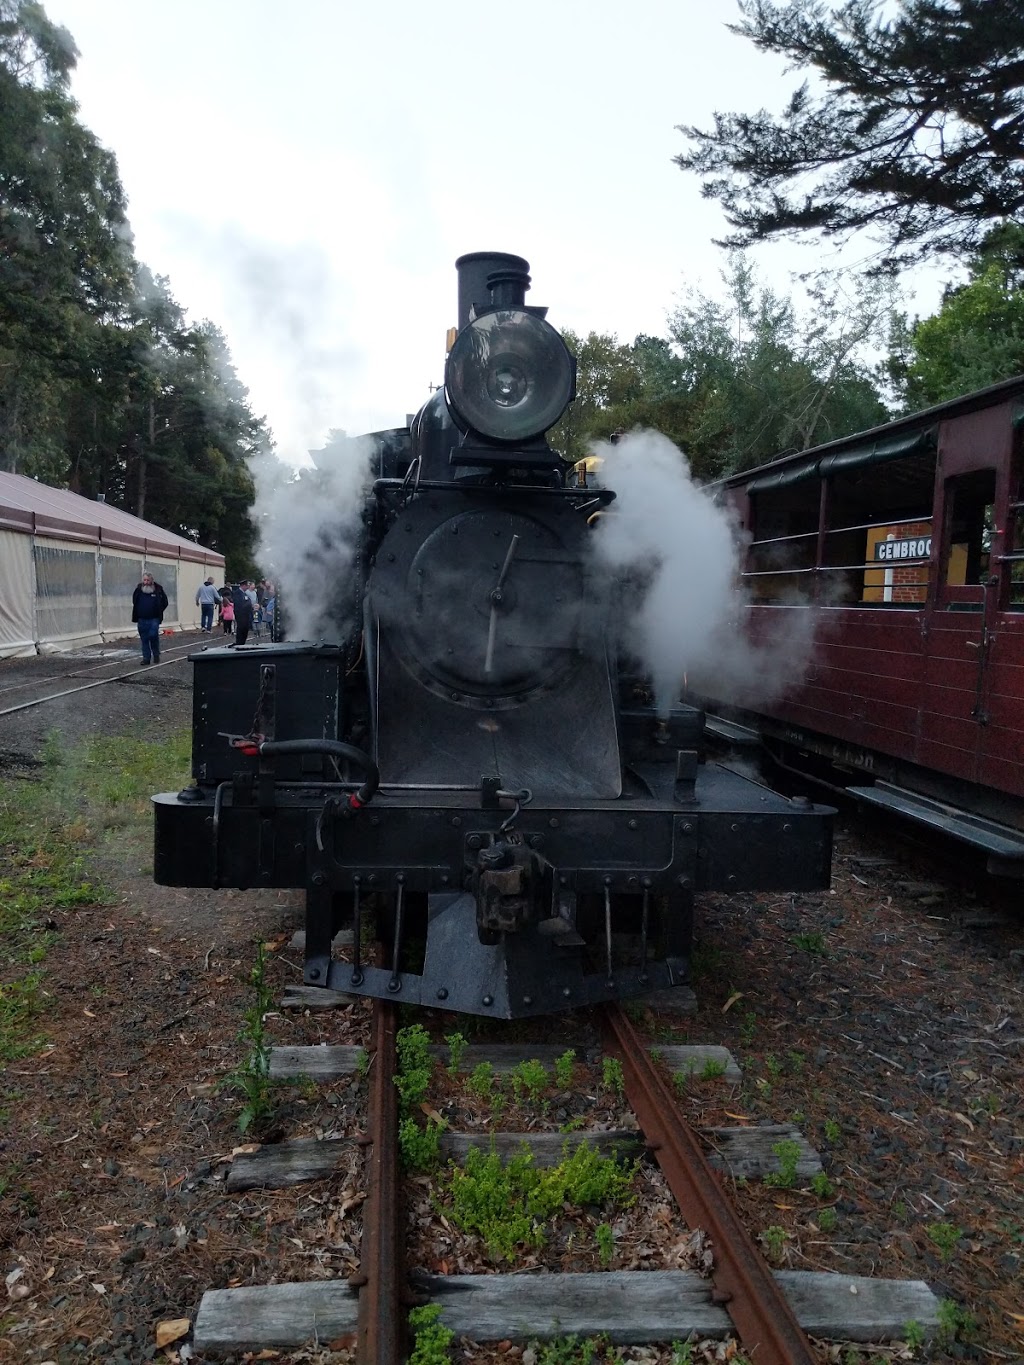 Gembrook Heritage Railway Station | museum | LOT 15 Station Rd, Gembrook VIC 3783, Australia